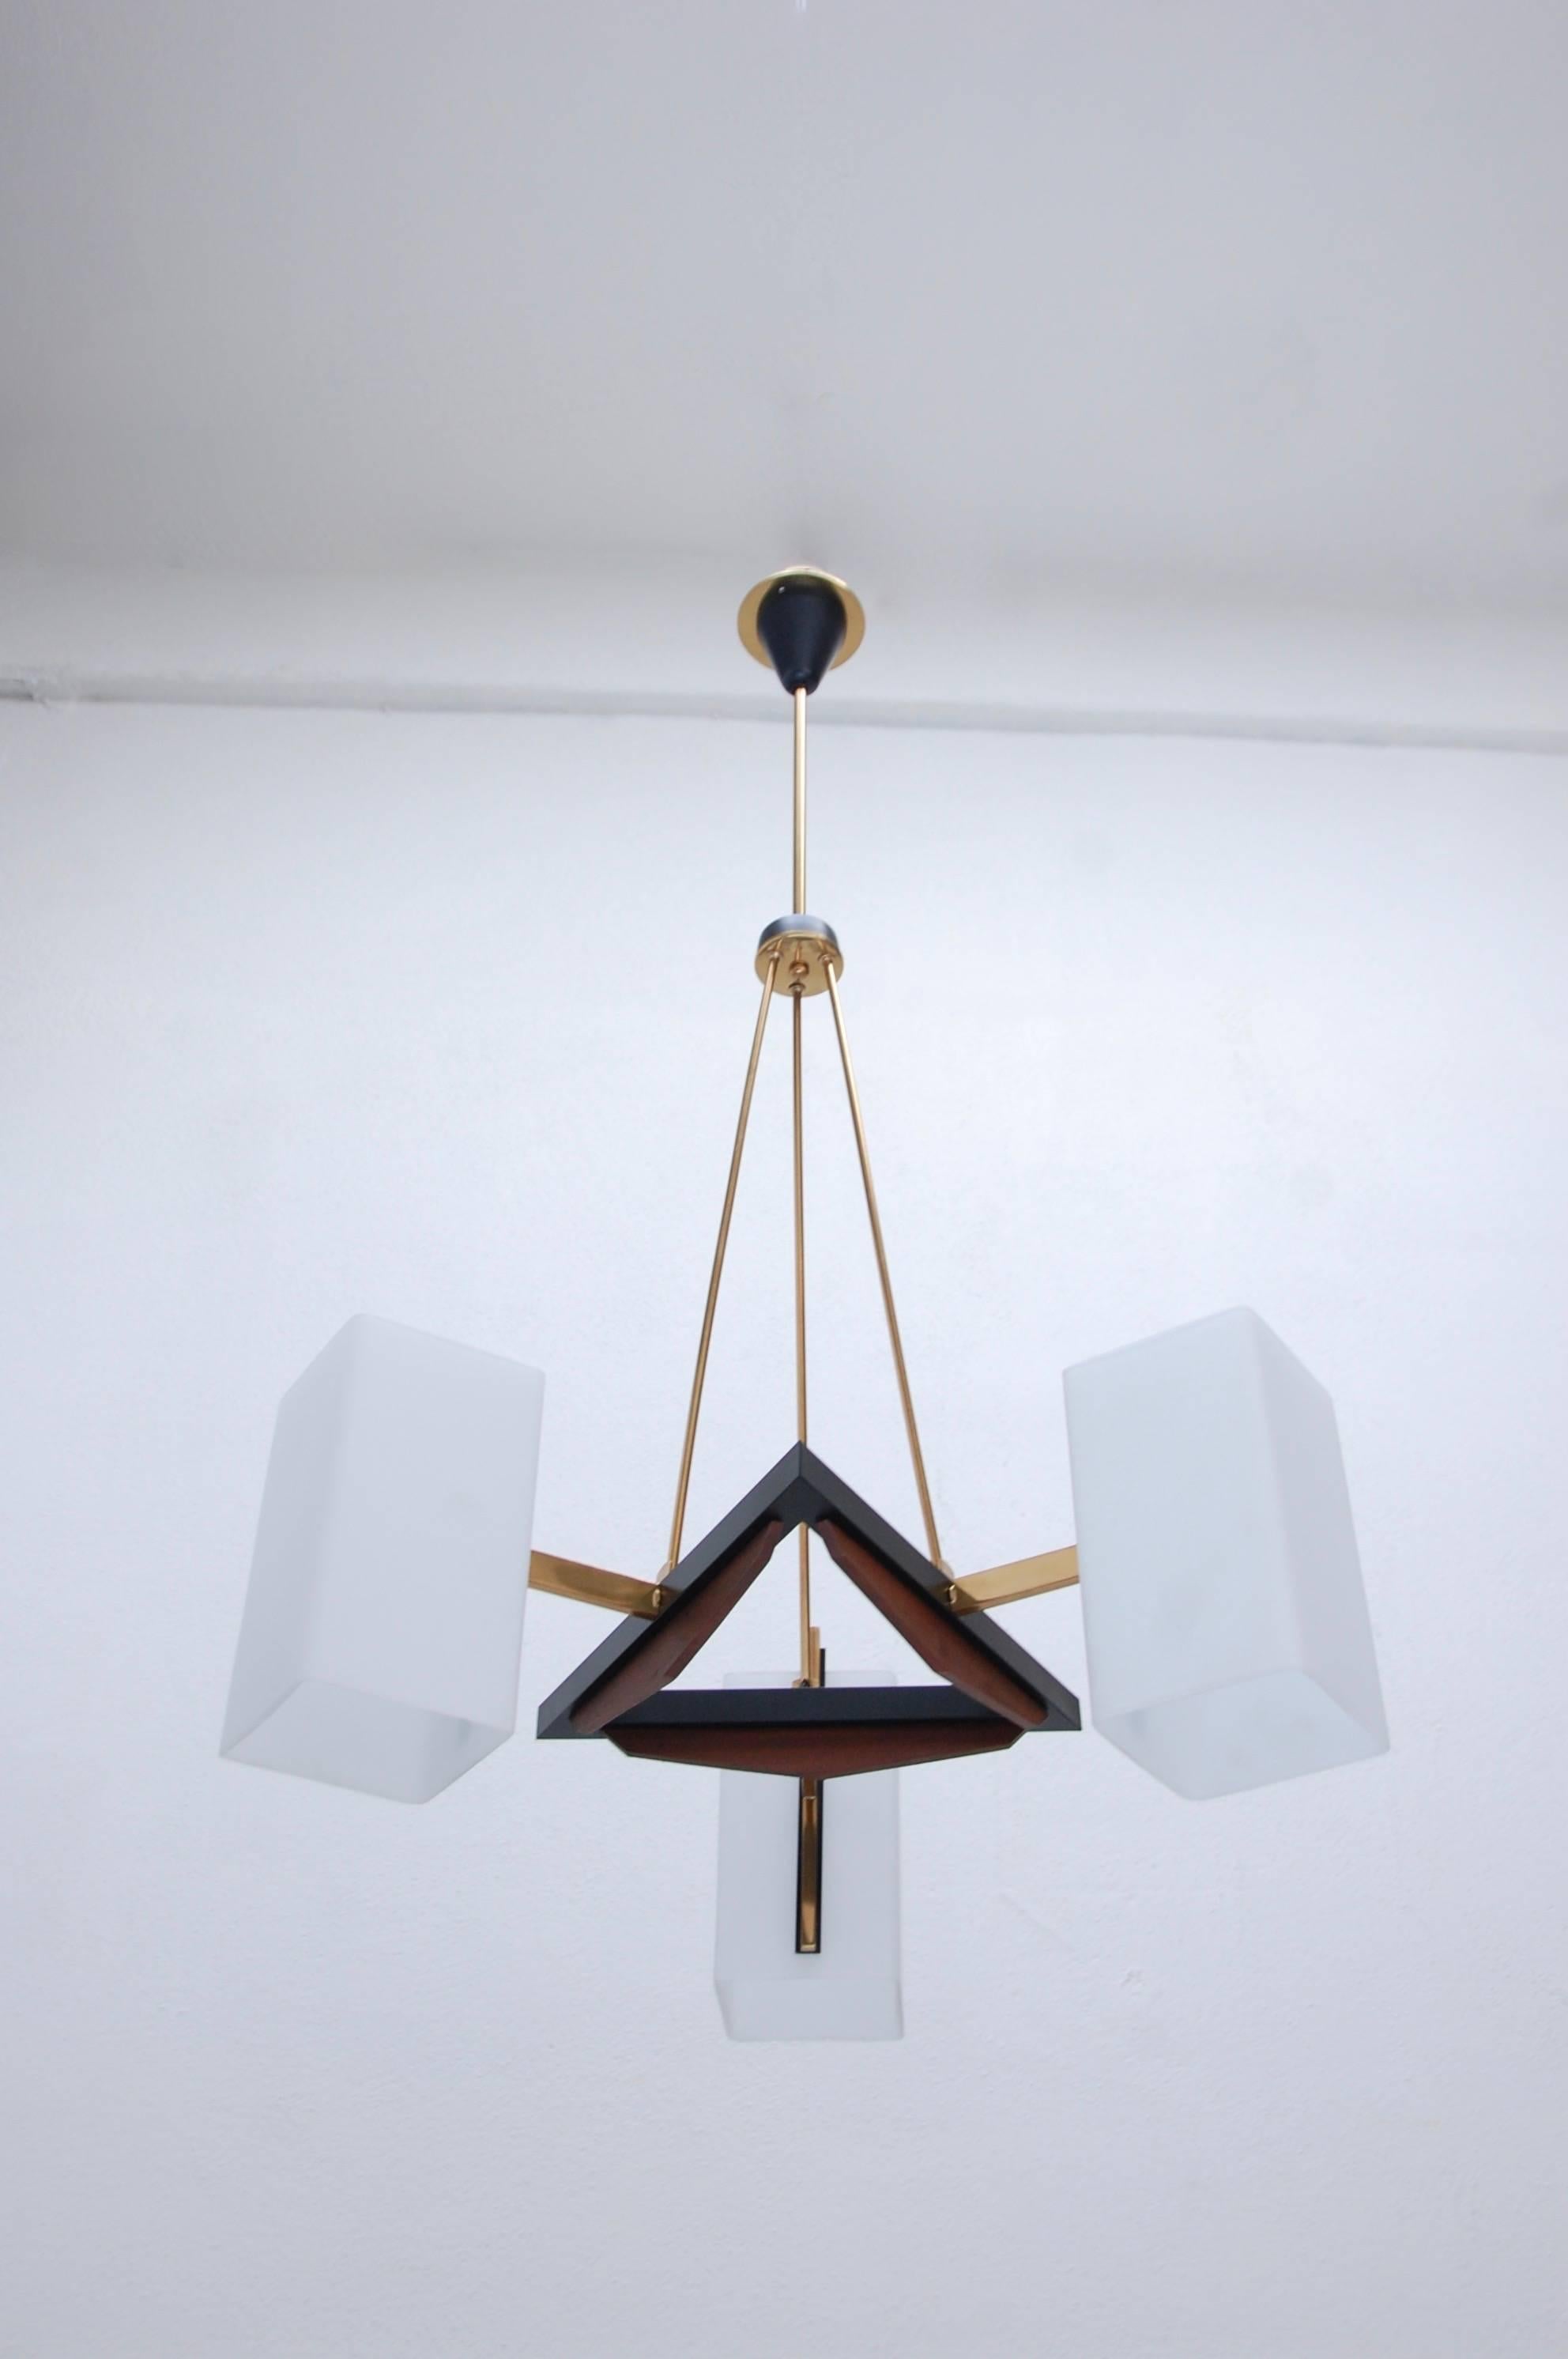 Of the period Italian triangular chandelier in brass, glass and teak wood, with three glass shades from the 1950s. Fully restored, original glass shades, single E12 candelabra based socket per shade, wired for the US. Overall drop adjustable upon